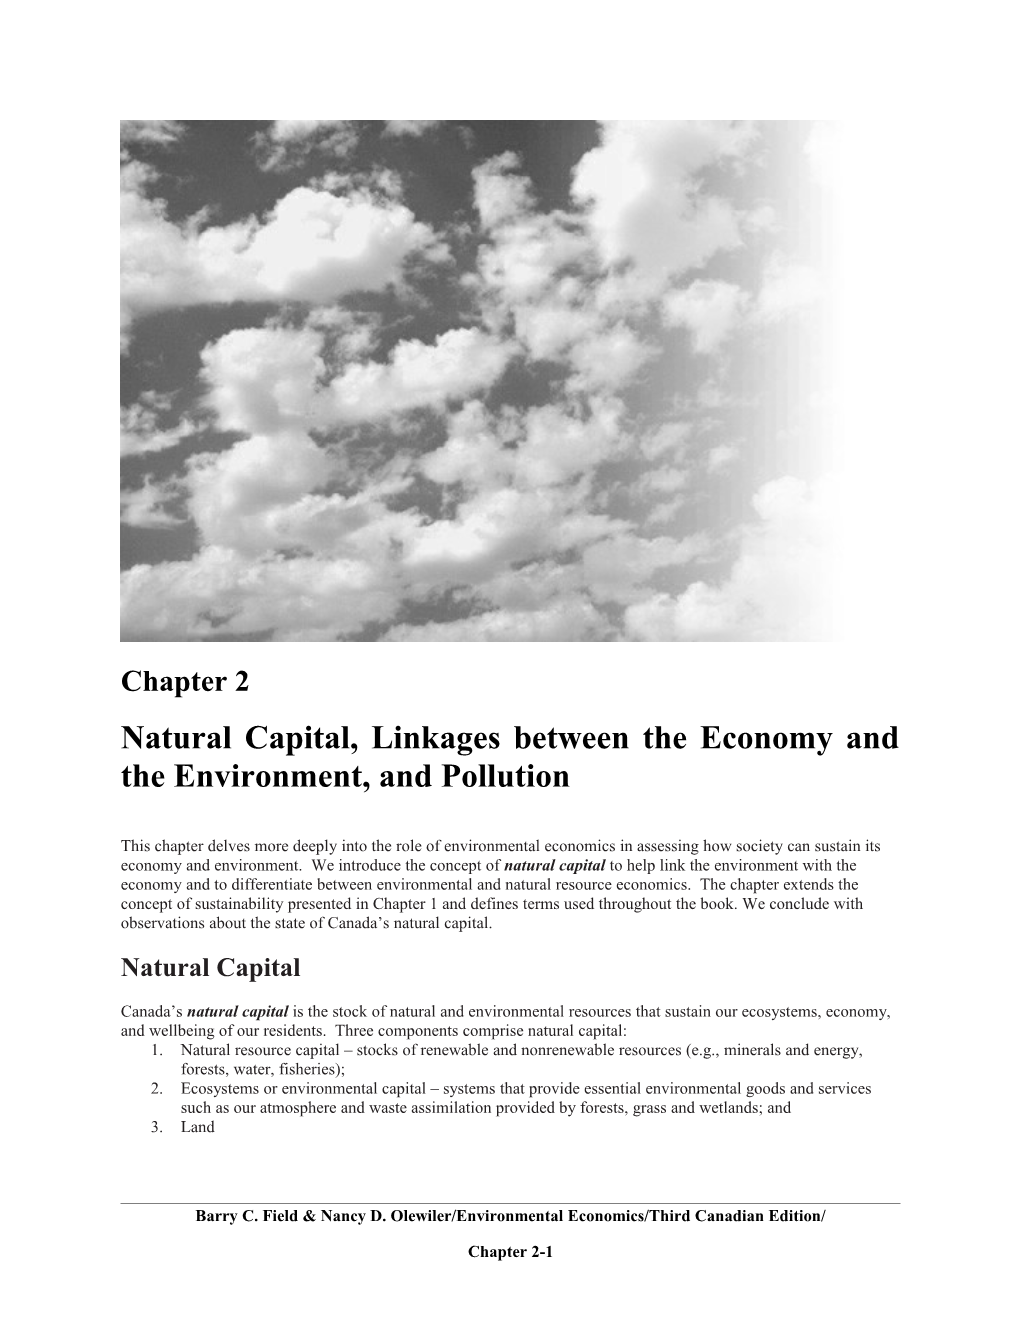 Chapter 2: LINKAGES BETWEEN THE ECONOMY AND THE ENVIRONMENT